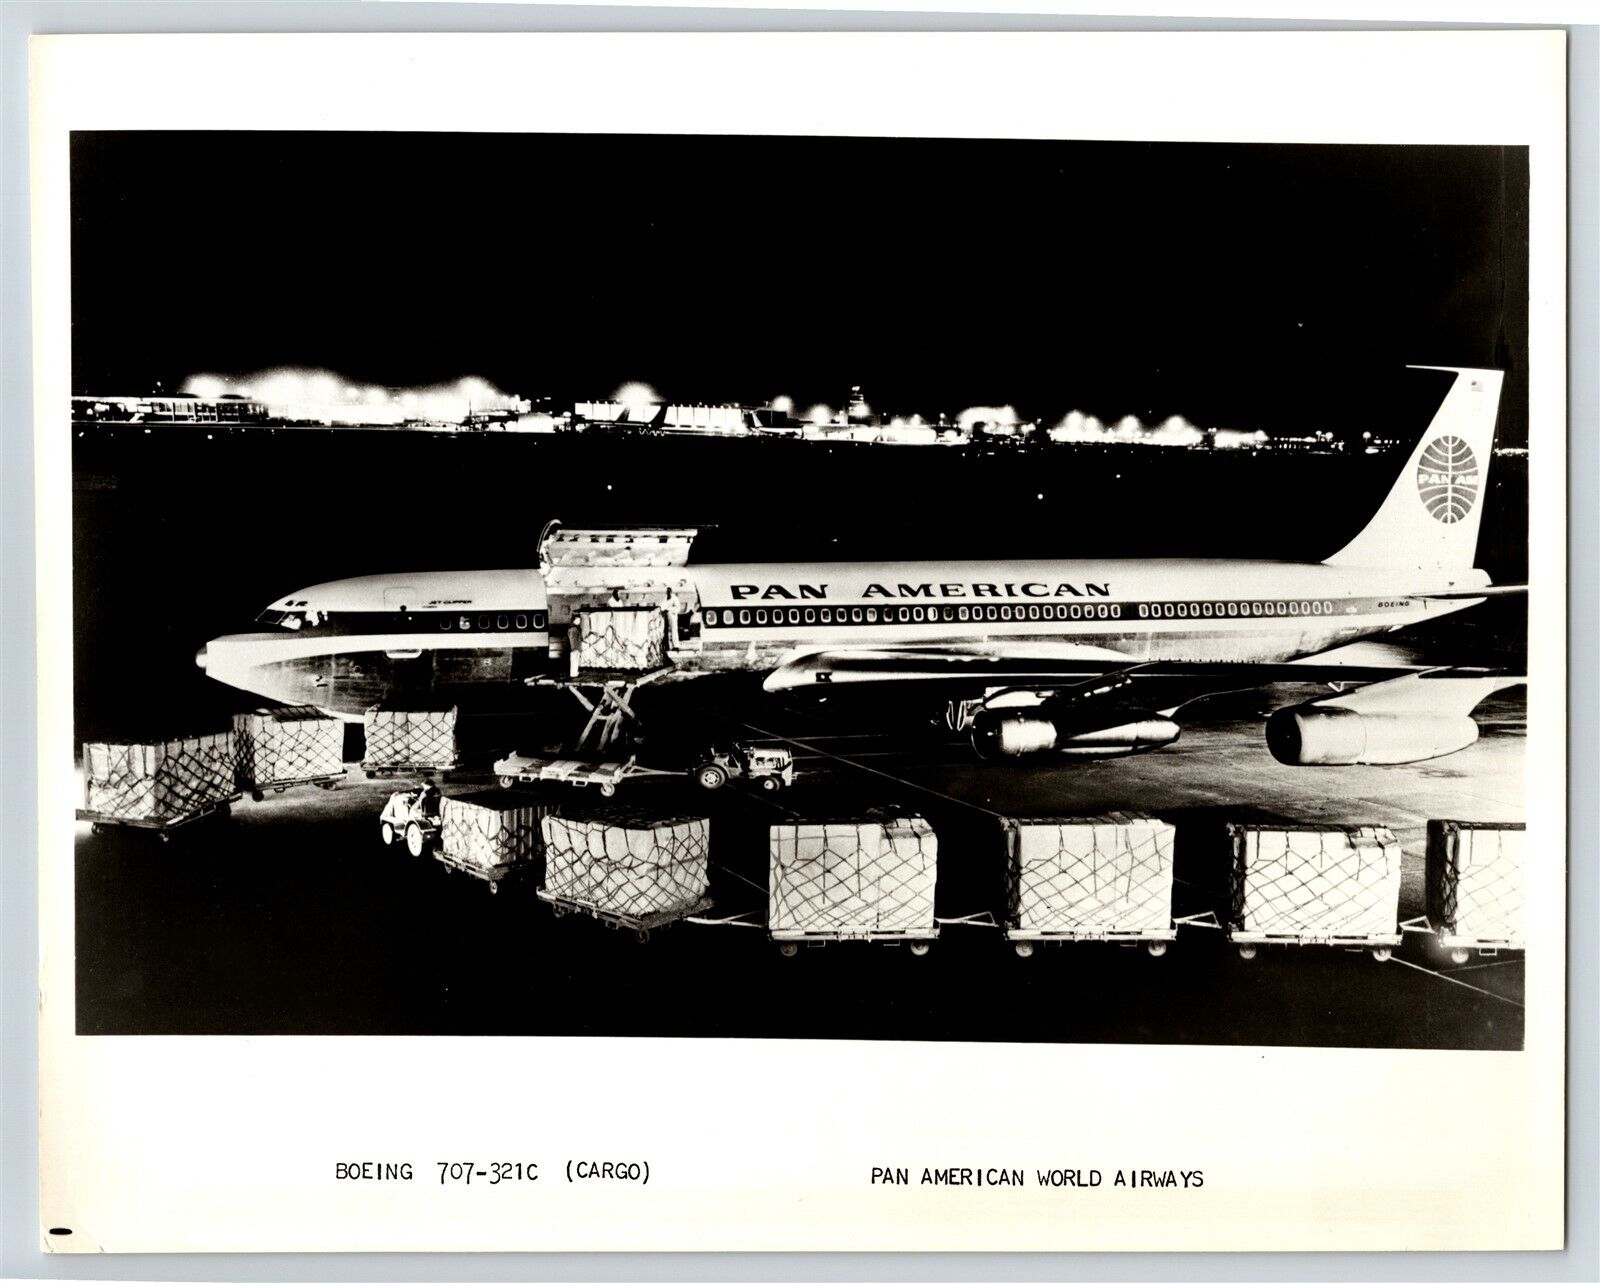 Airplane Pan American Pan Am Airlines Boeing 707 Cargo 8x10 B&W Photo C5